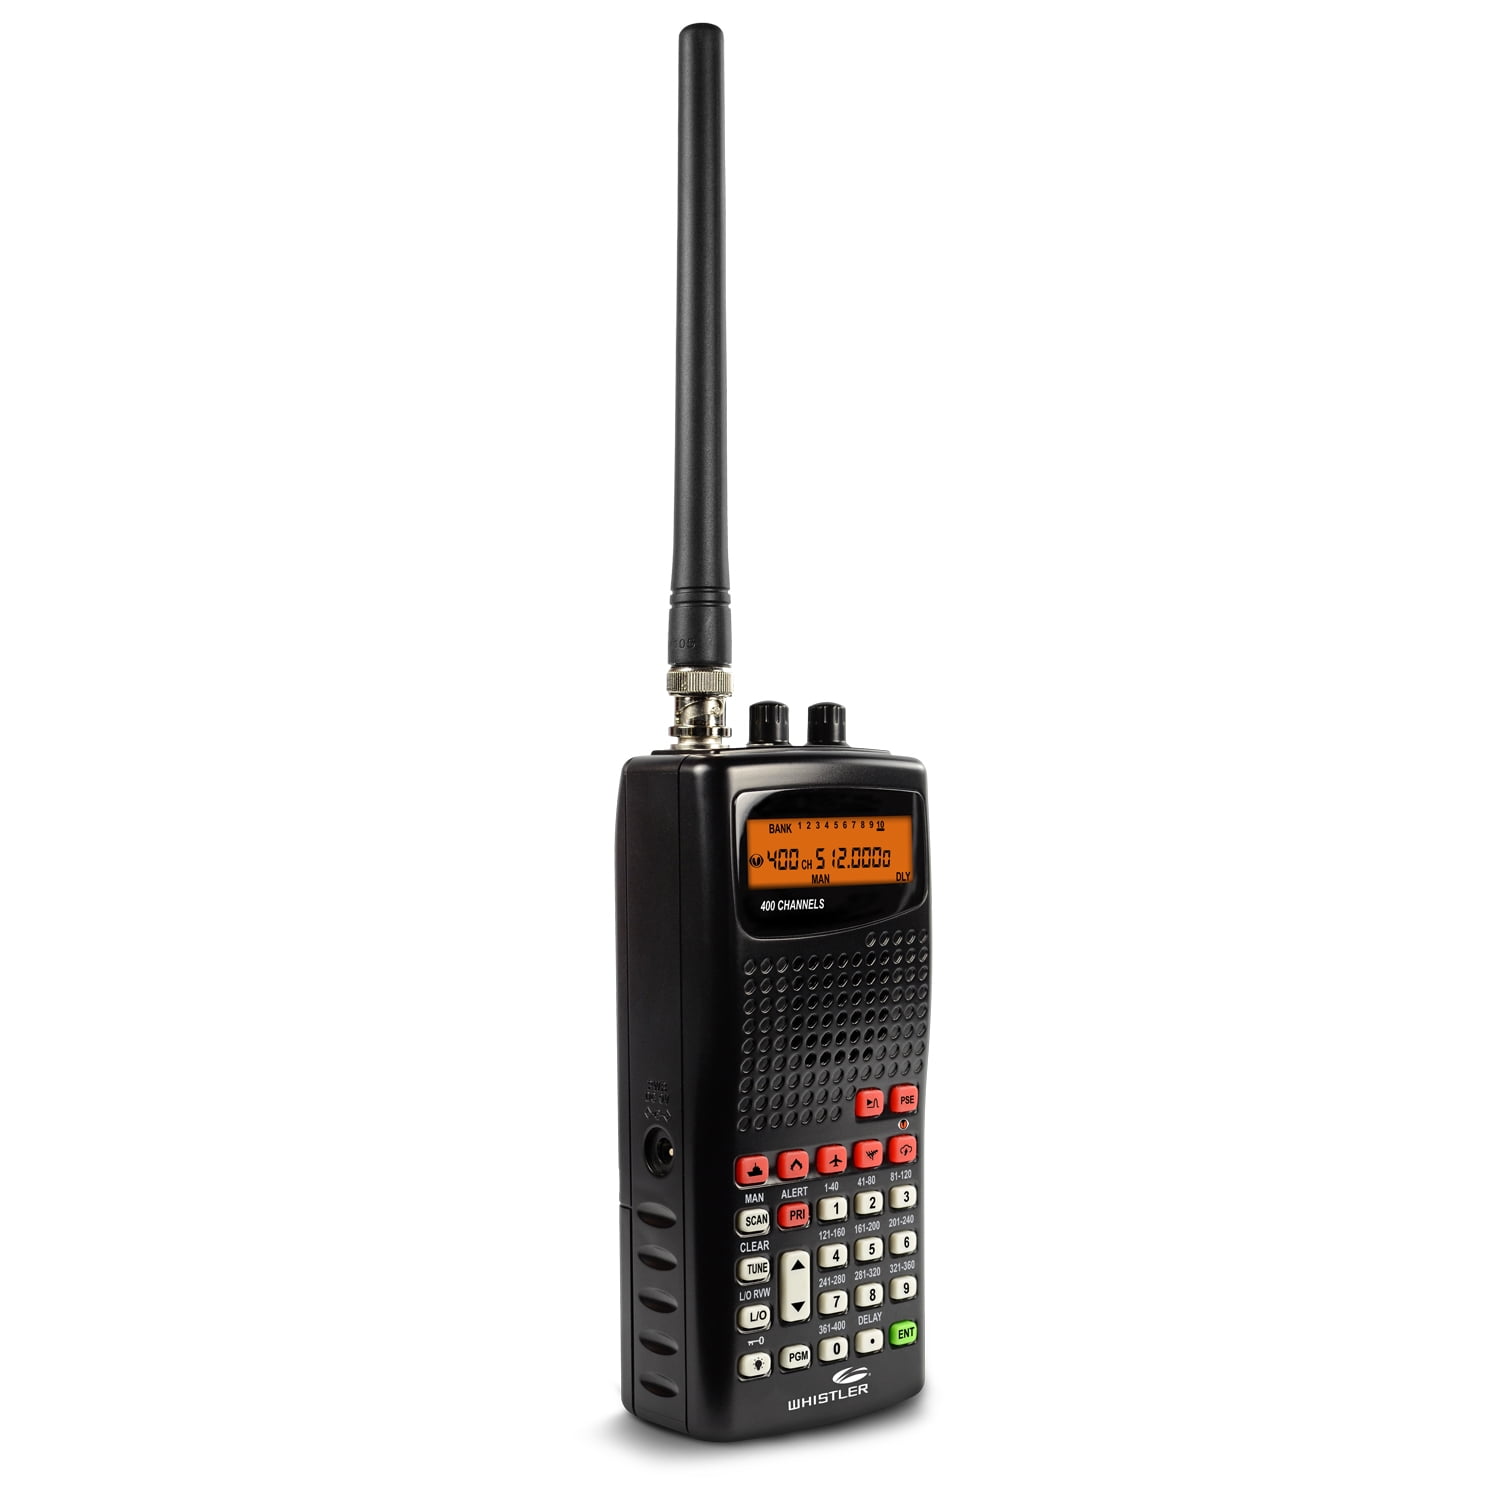 Whistler WS1010WA Radio Scanner with Service Search Banks for Fire/Police, Aircraft Plus More